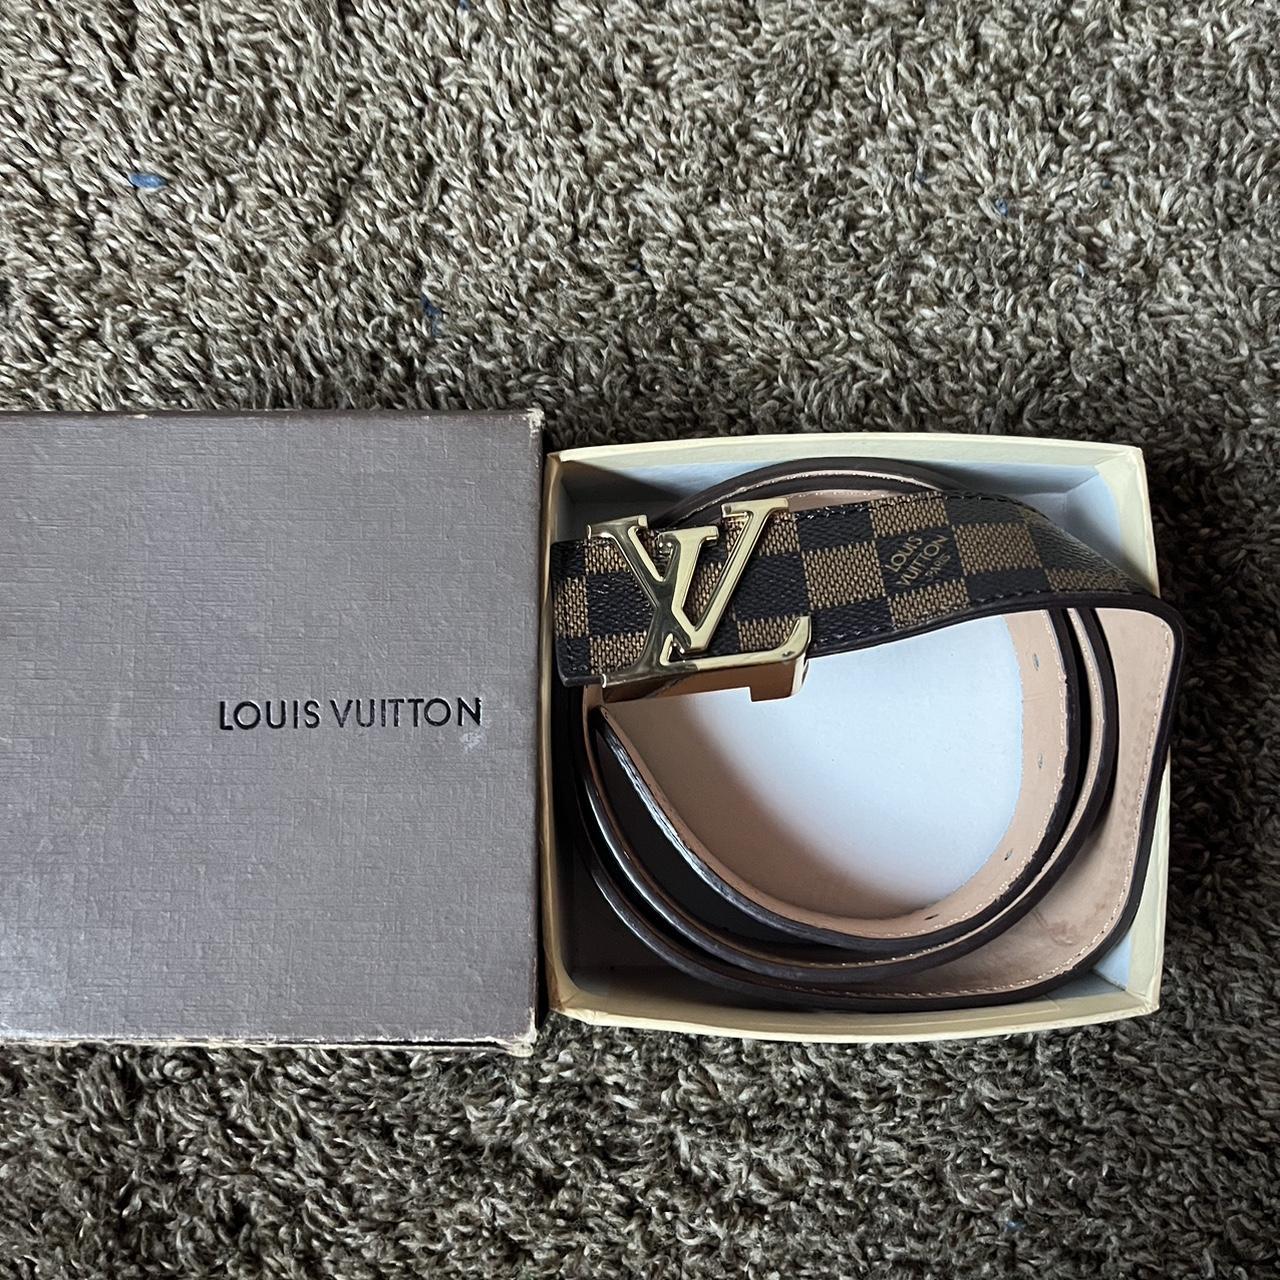 Supreme Louis Vuitton belt size in picture 46/115 for Sale in